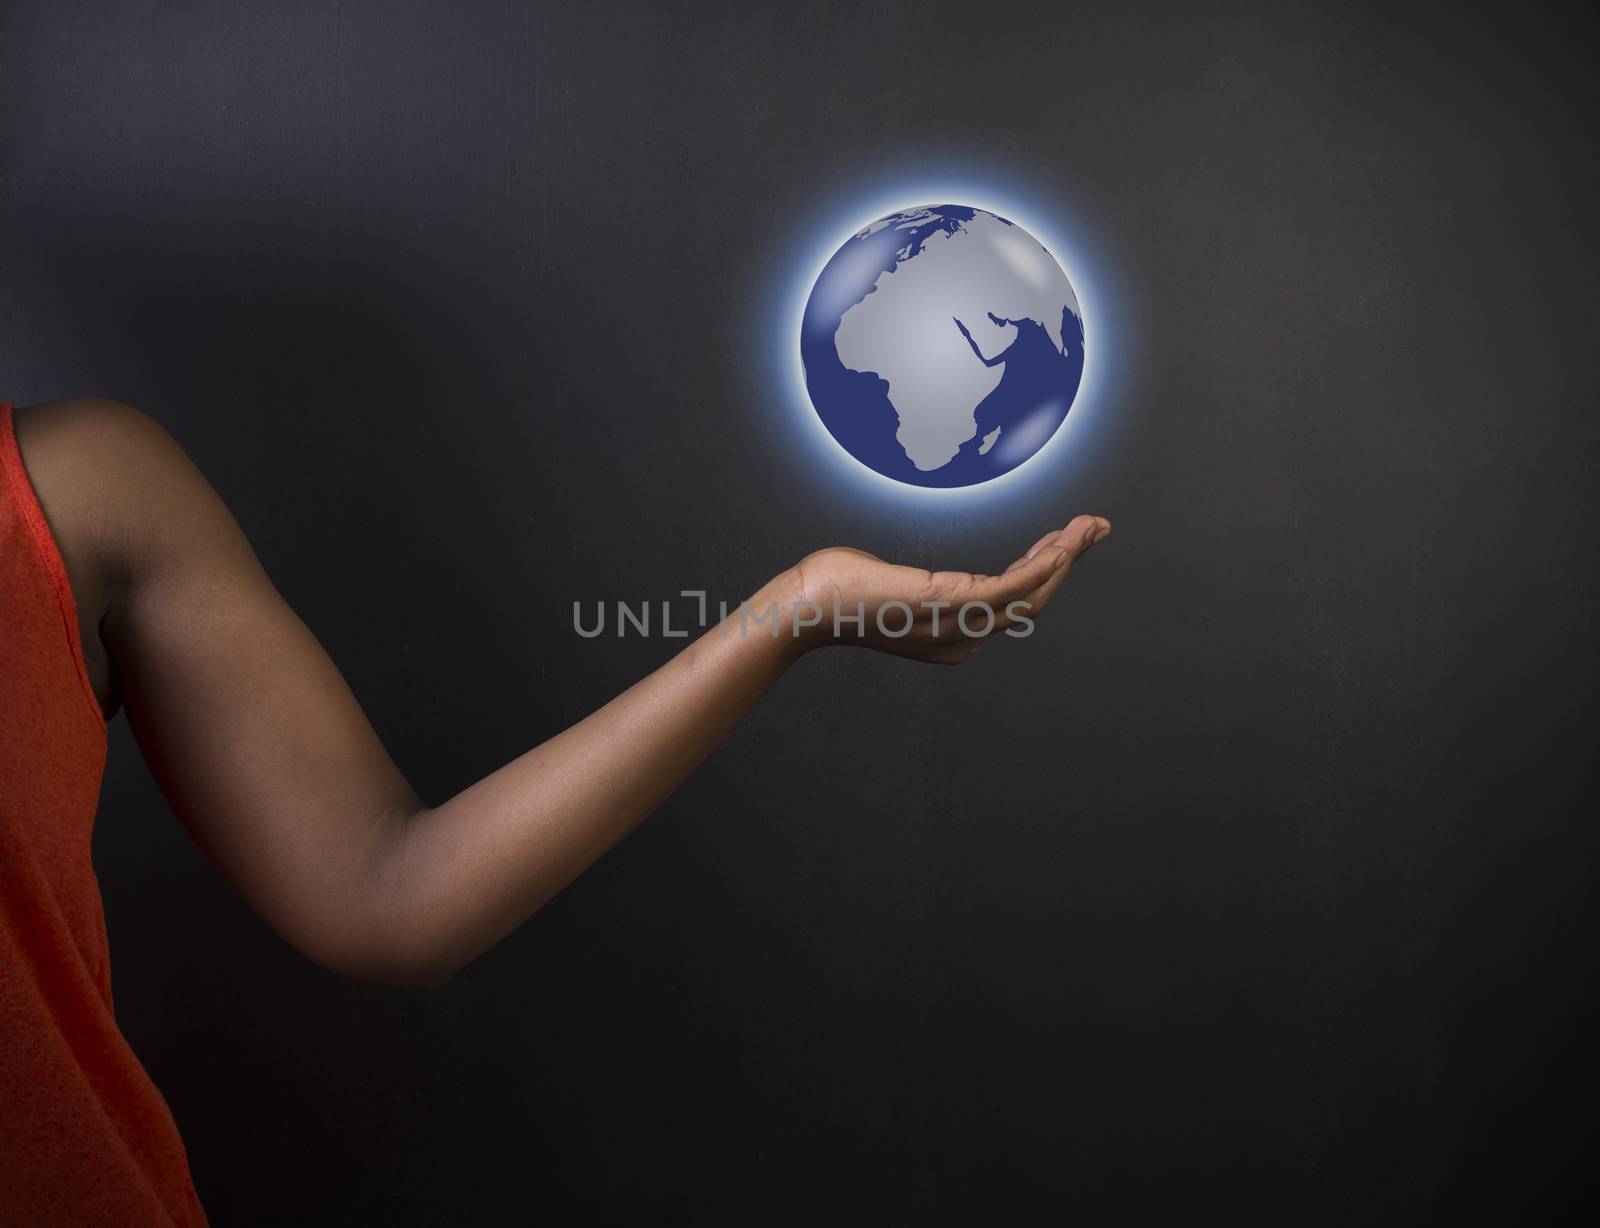 South African or African American woman teacher or student holding world earth globe in the palm of her had on black background